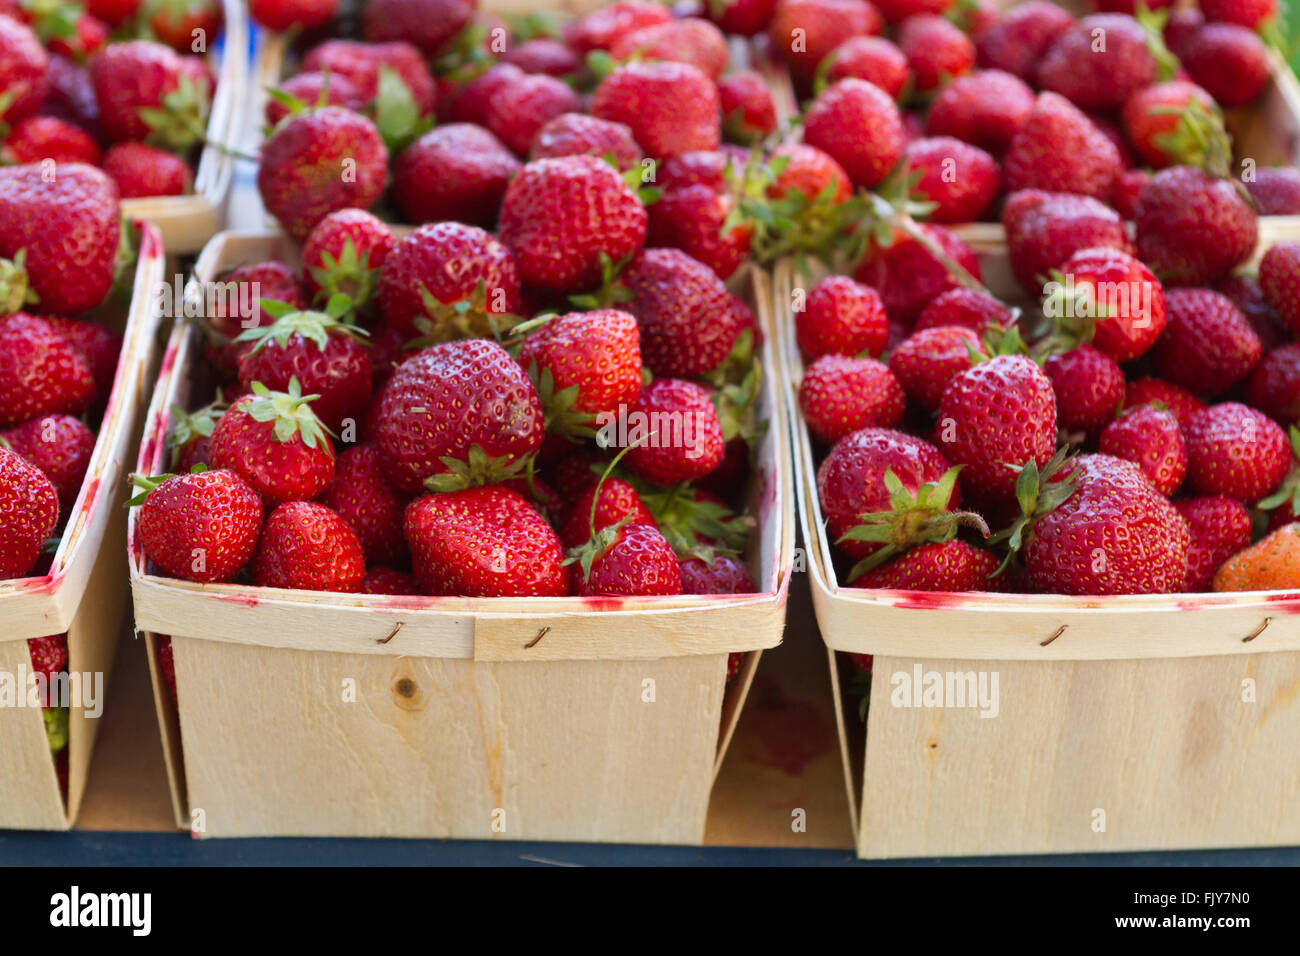 Freshly picked strawberries in baskets at the farmer's market Stock Photo